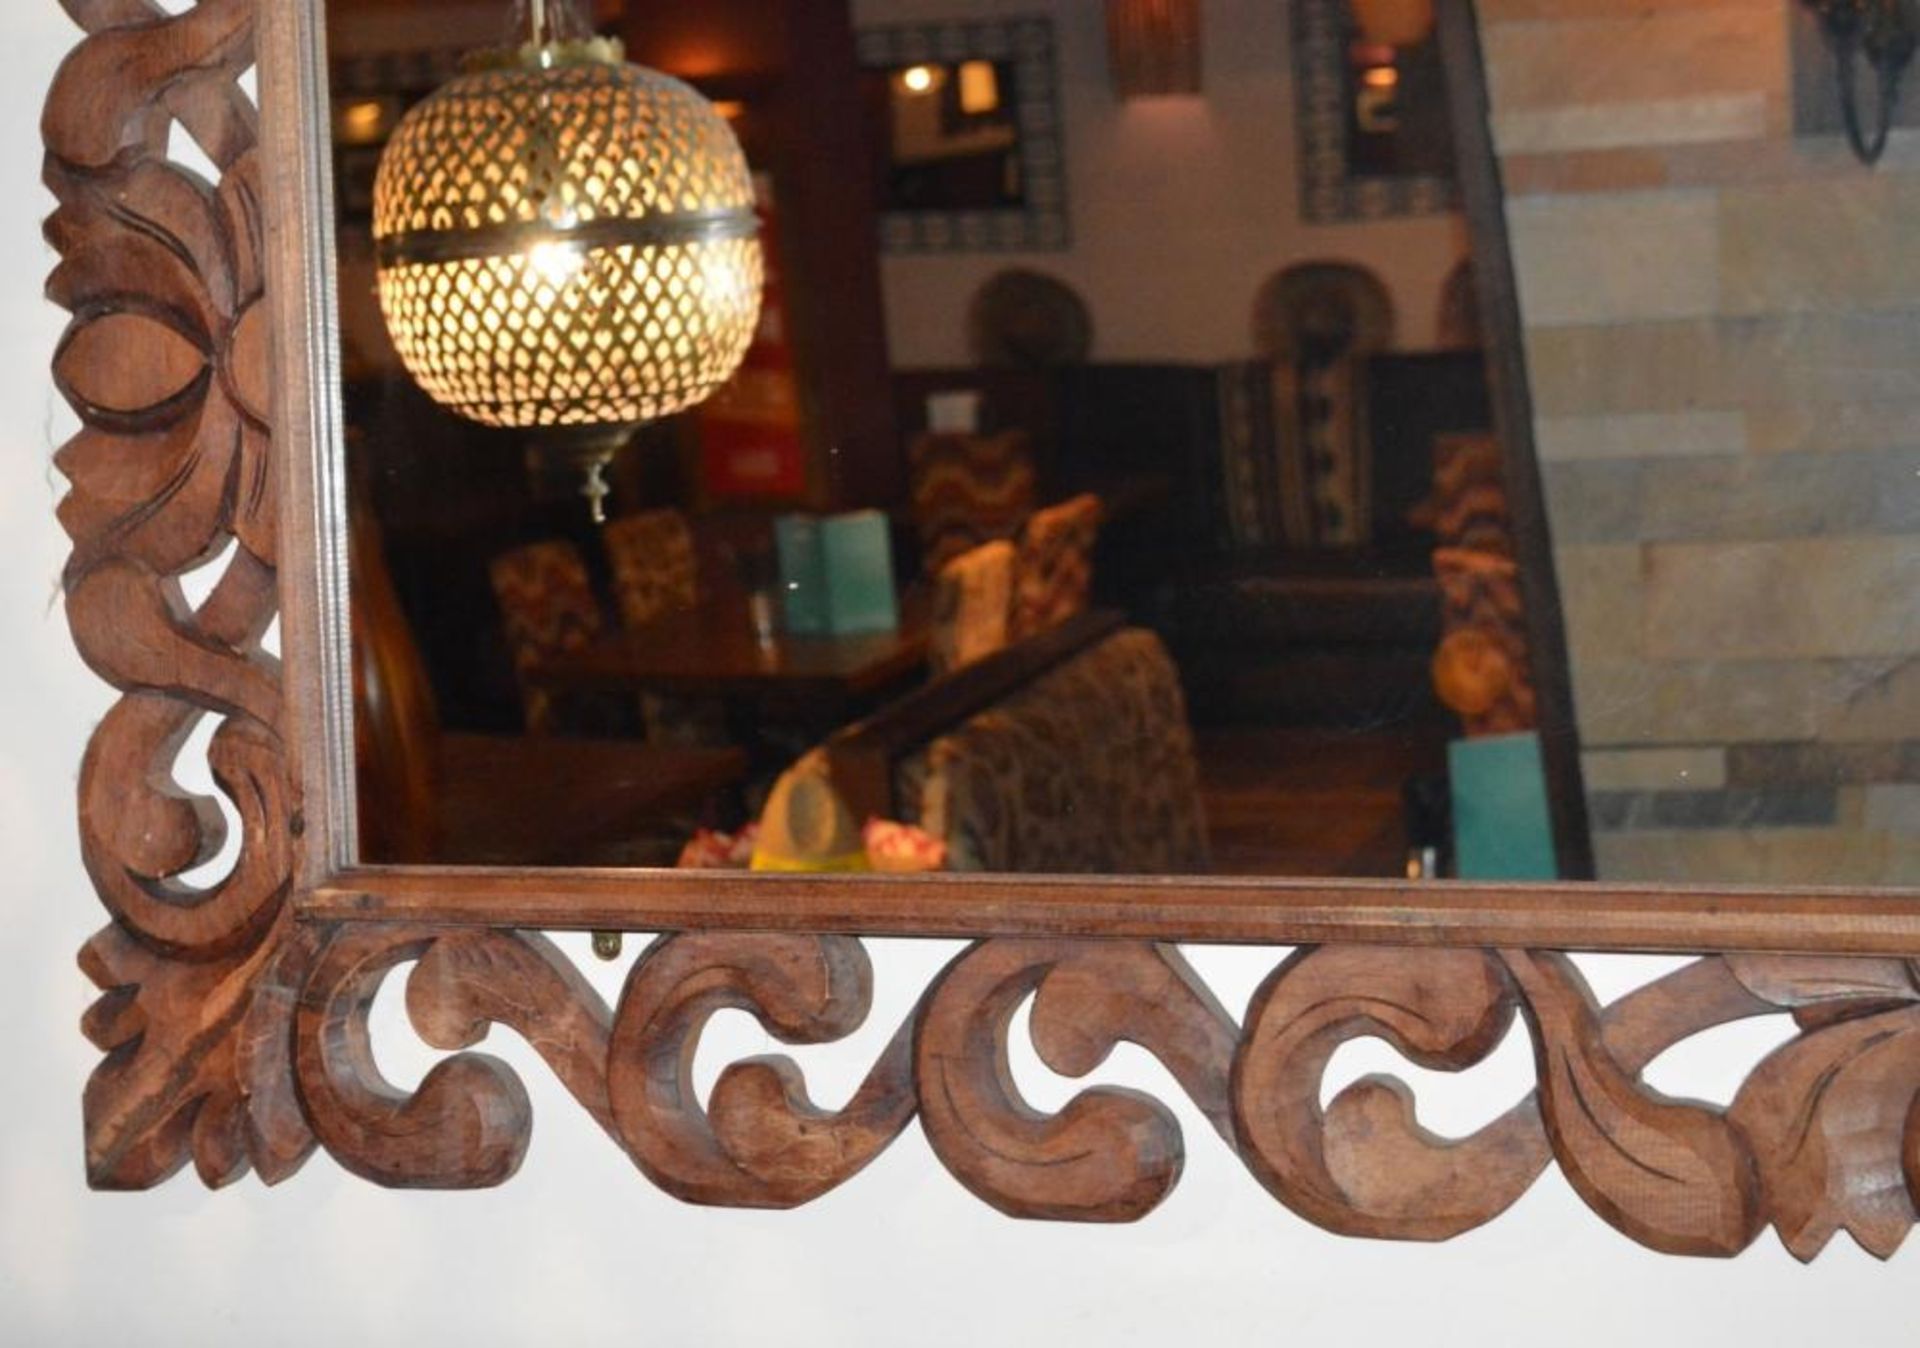 1 x Large Rectangular Wall Mirror With An Ornate Carved Wooden Frame - Dimensions (approx): Height - Image 2 of 3